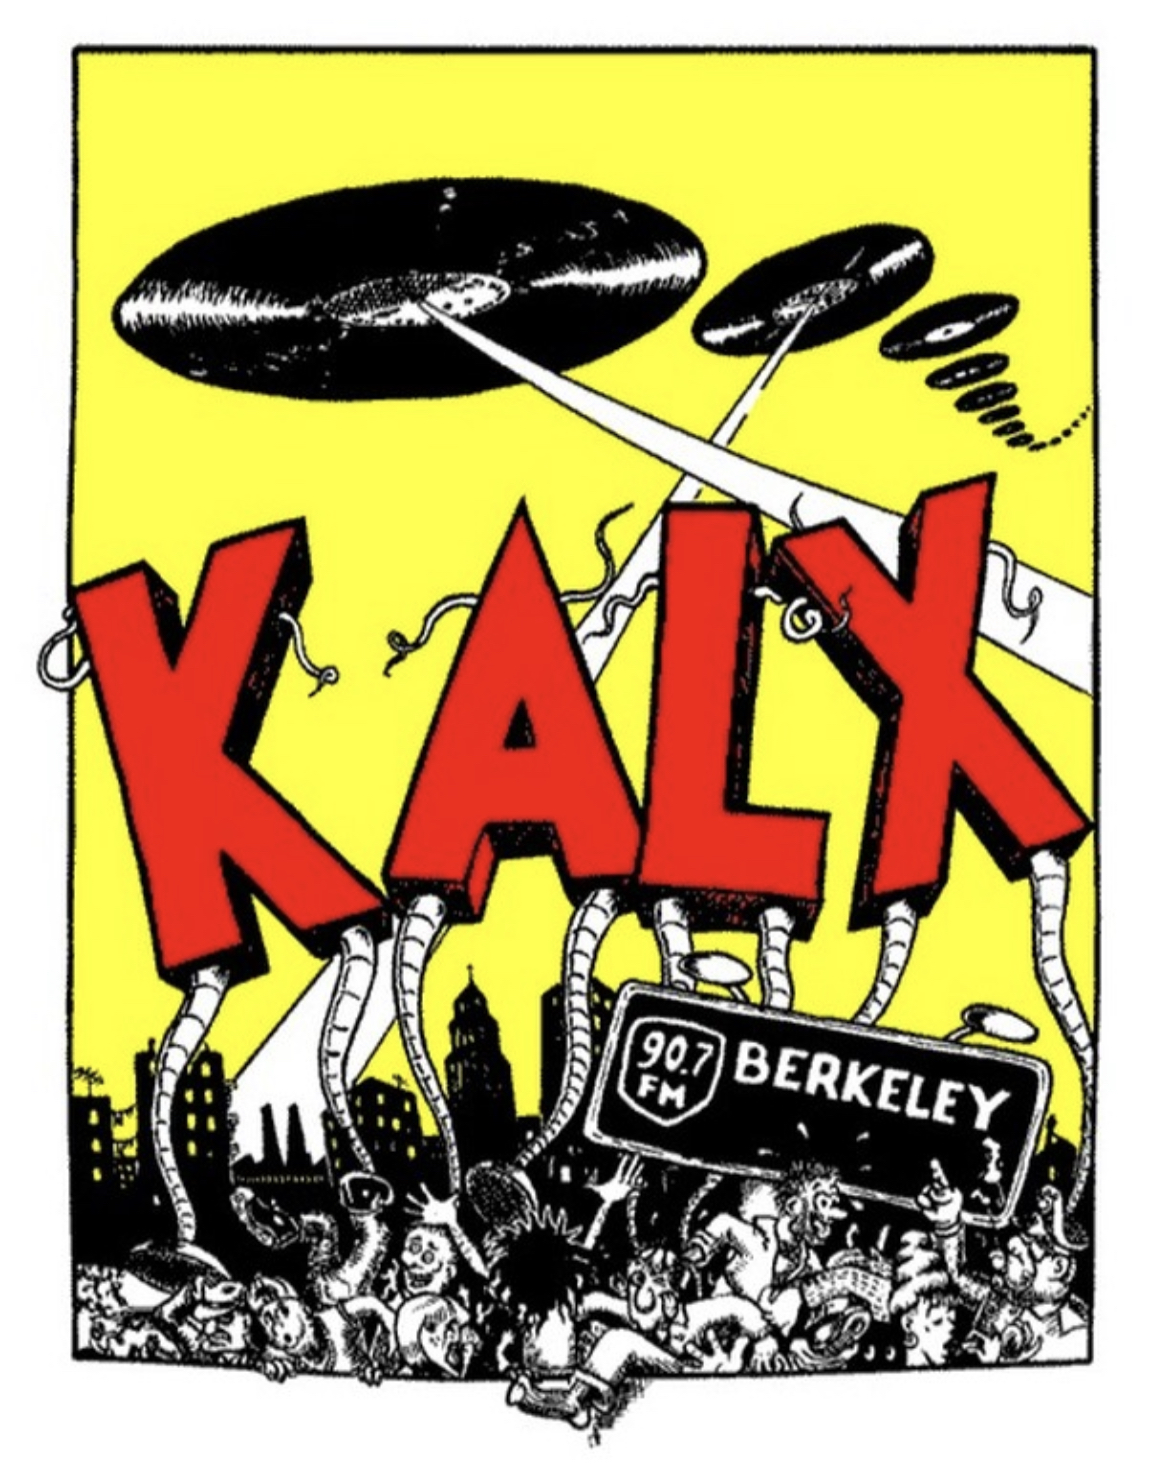 kalx in red letters above a cityscape with flying vinyl recorders in the sky above shooting lasers at the city